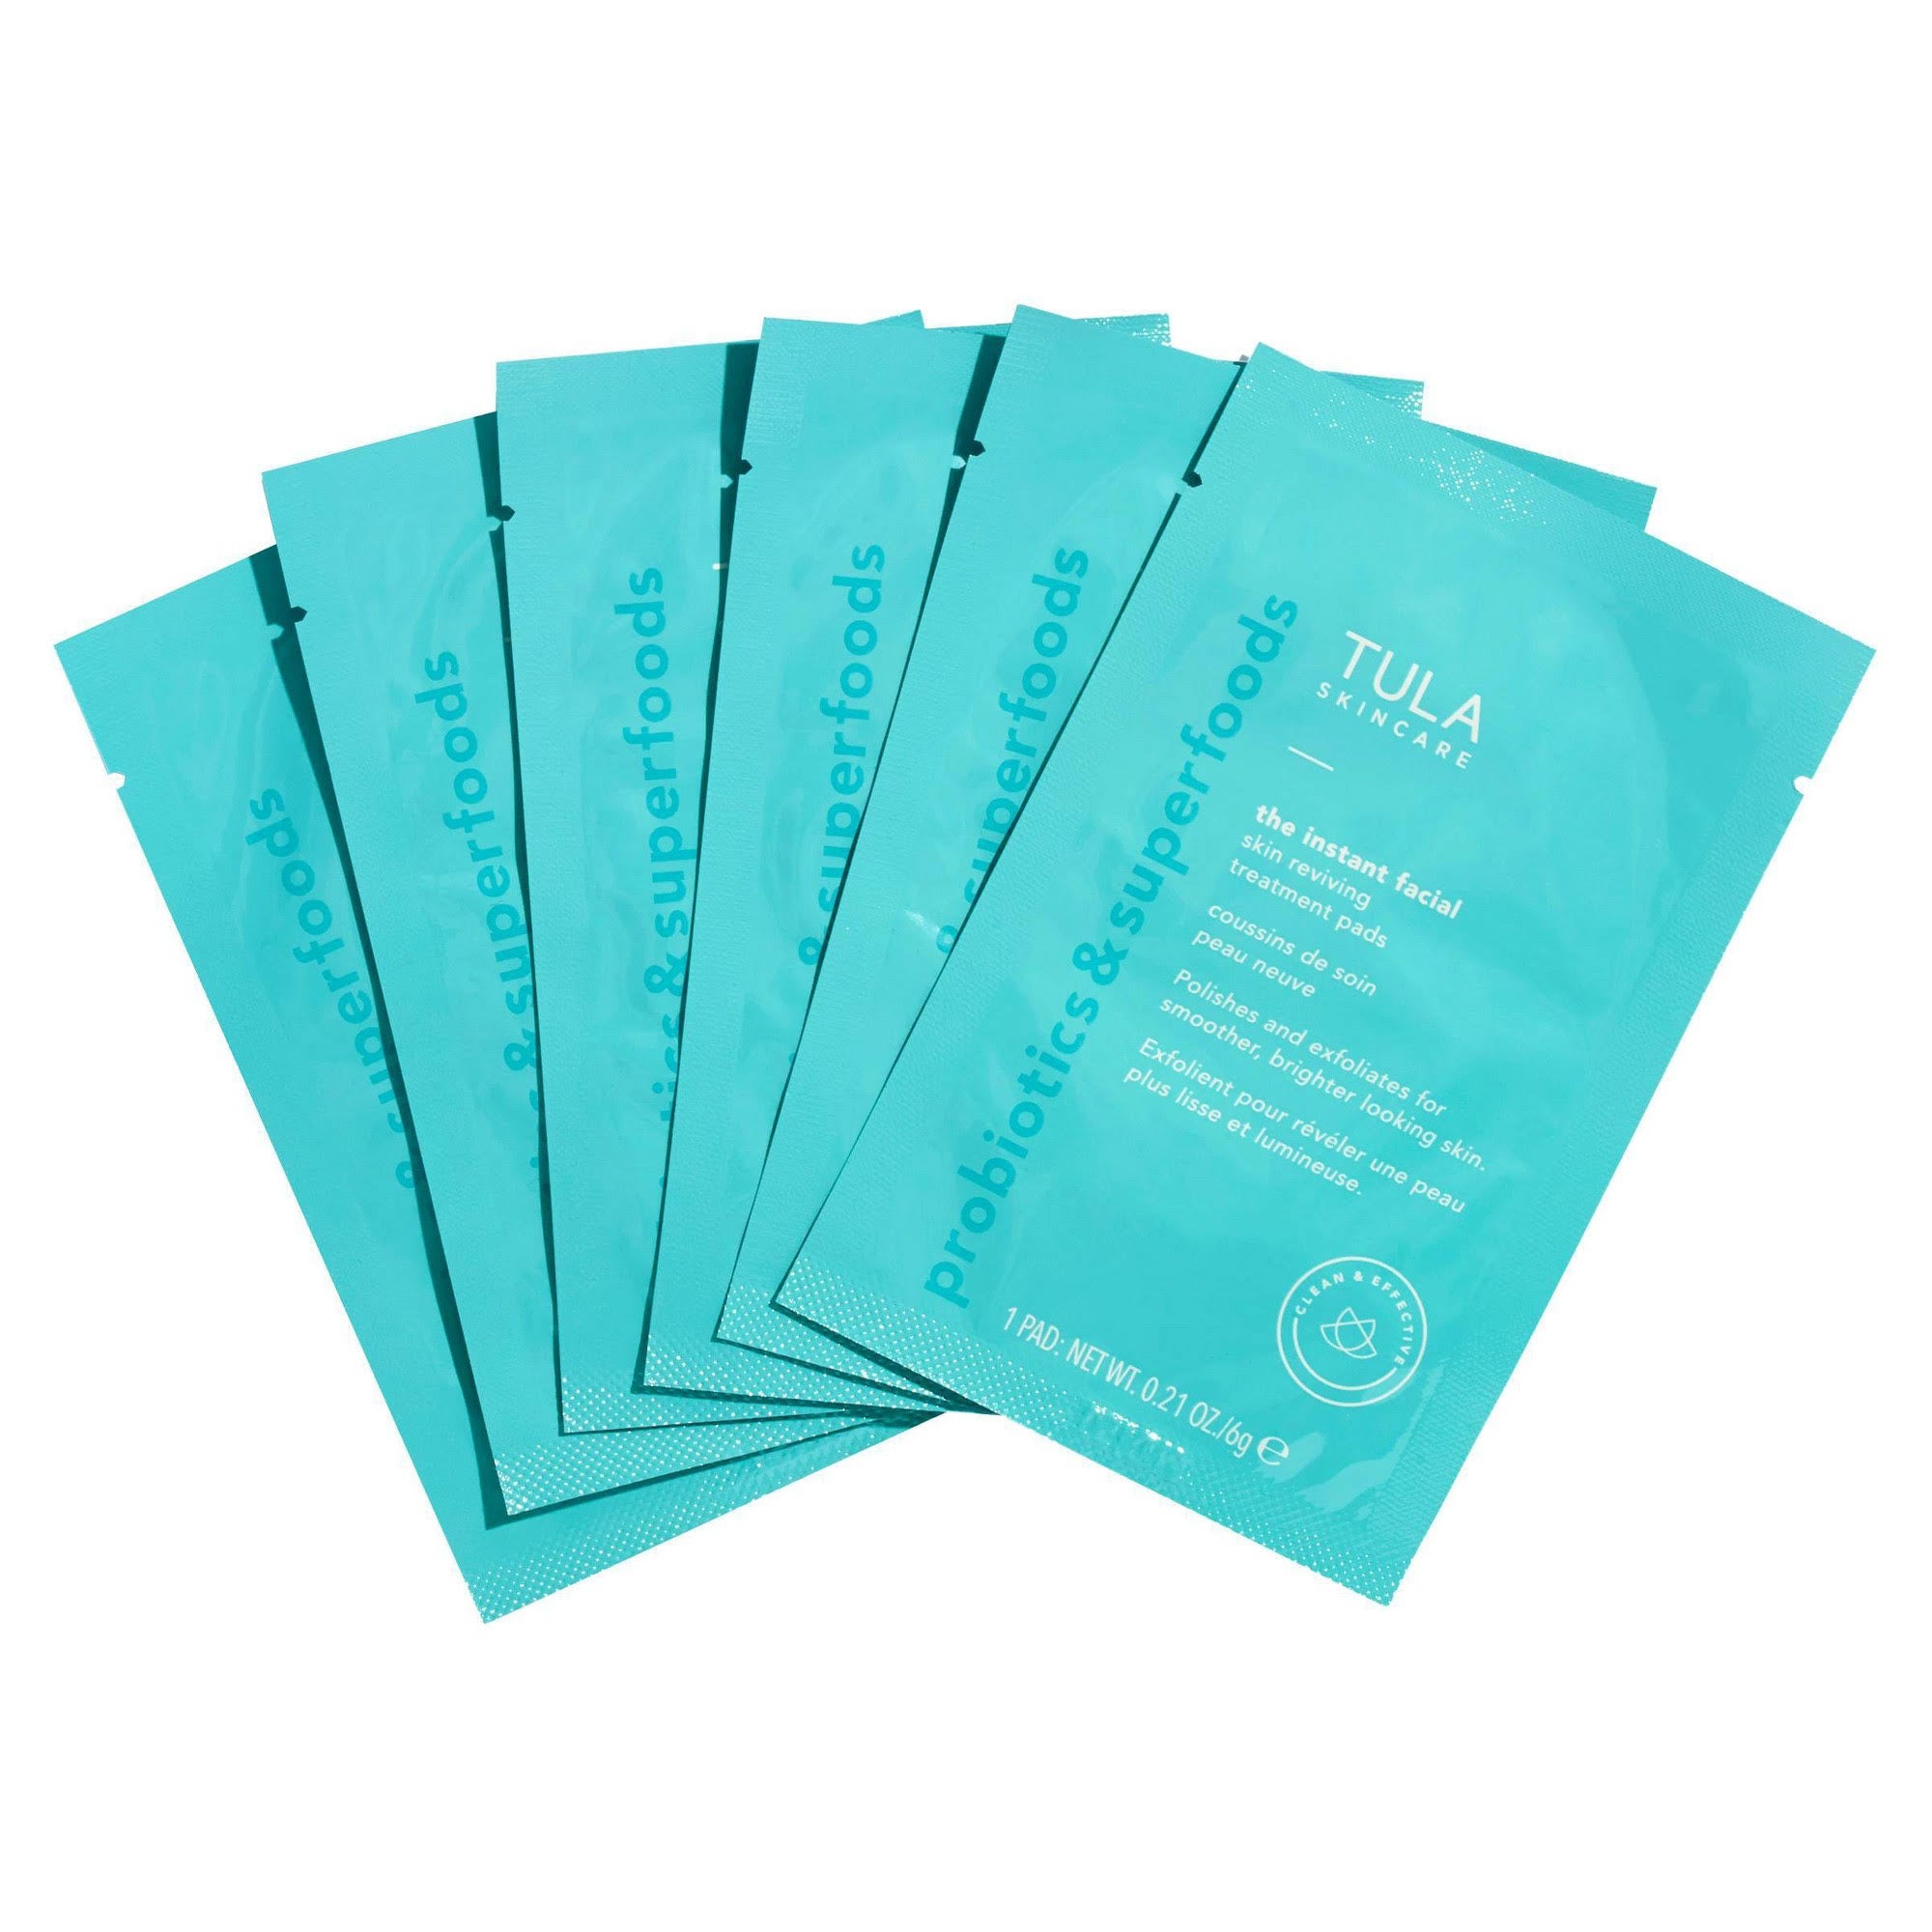 The Instant Facial Dual-Phase Skin Reviving Treatment Pads